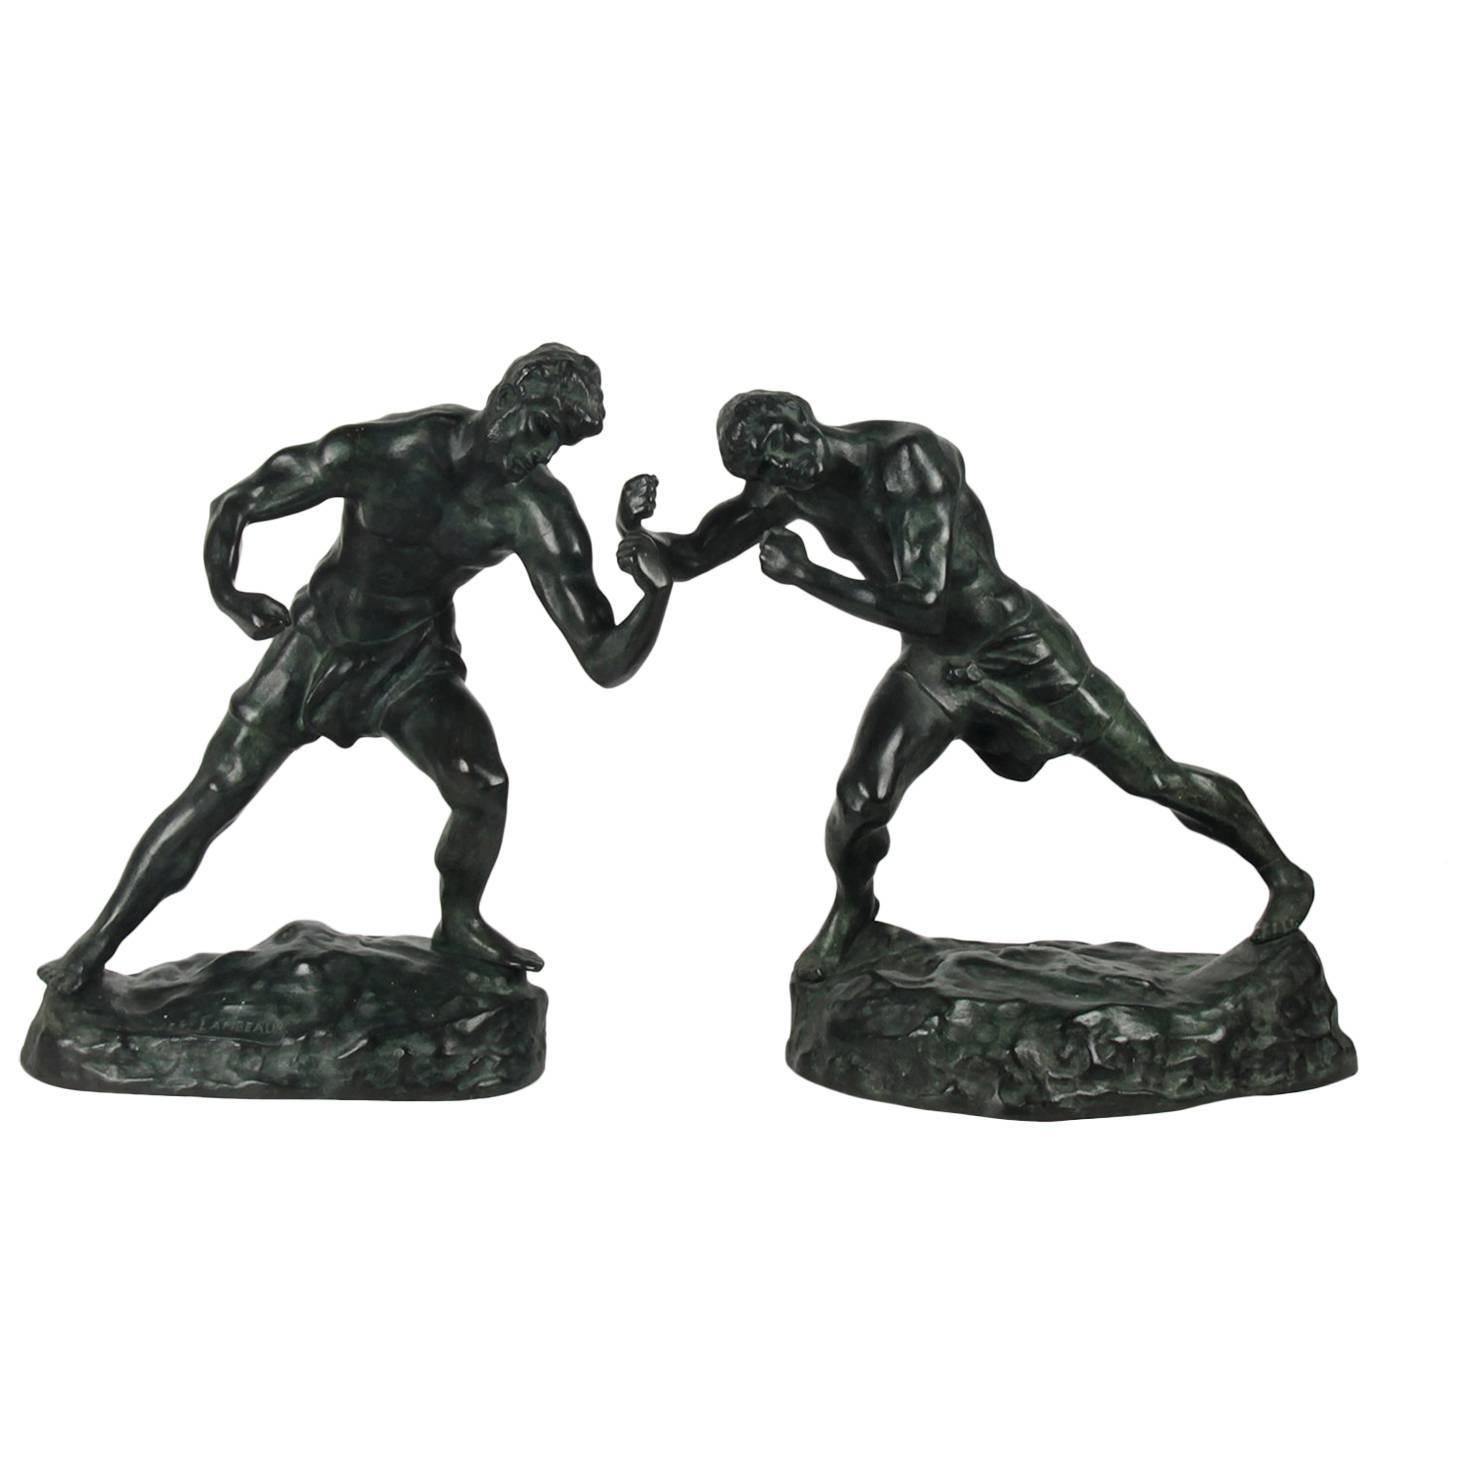 19th Century Bronze Pair of Two Boxing Figures, Signed by Jef Lambeaux